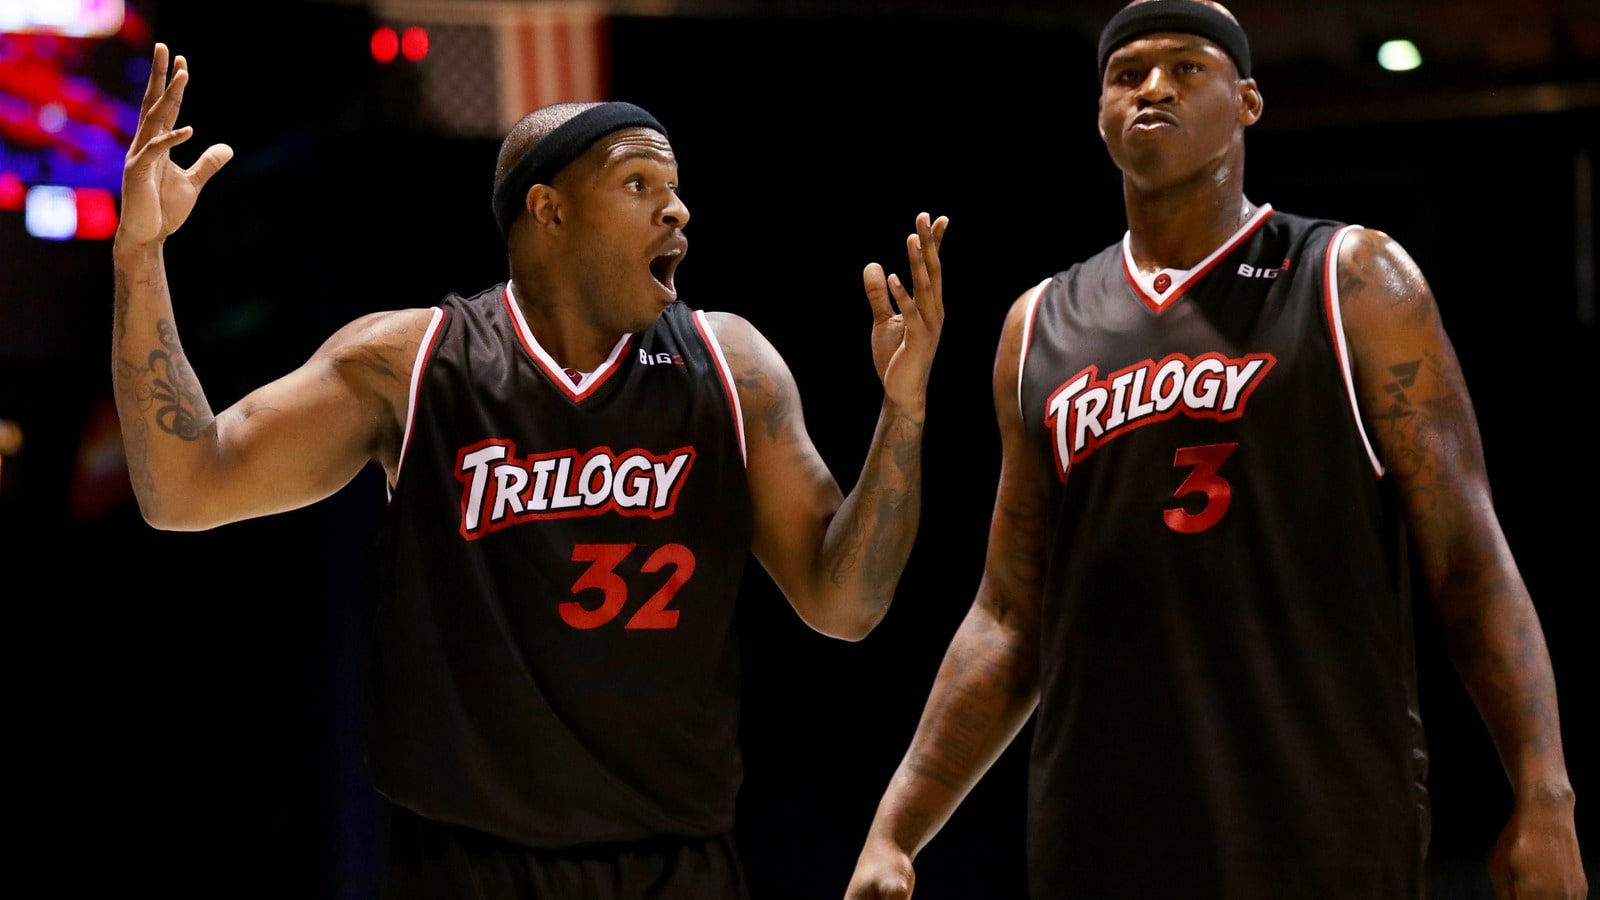 BIG3 Playoff Preview: Can anyone stop Trilogy? 